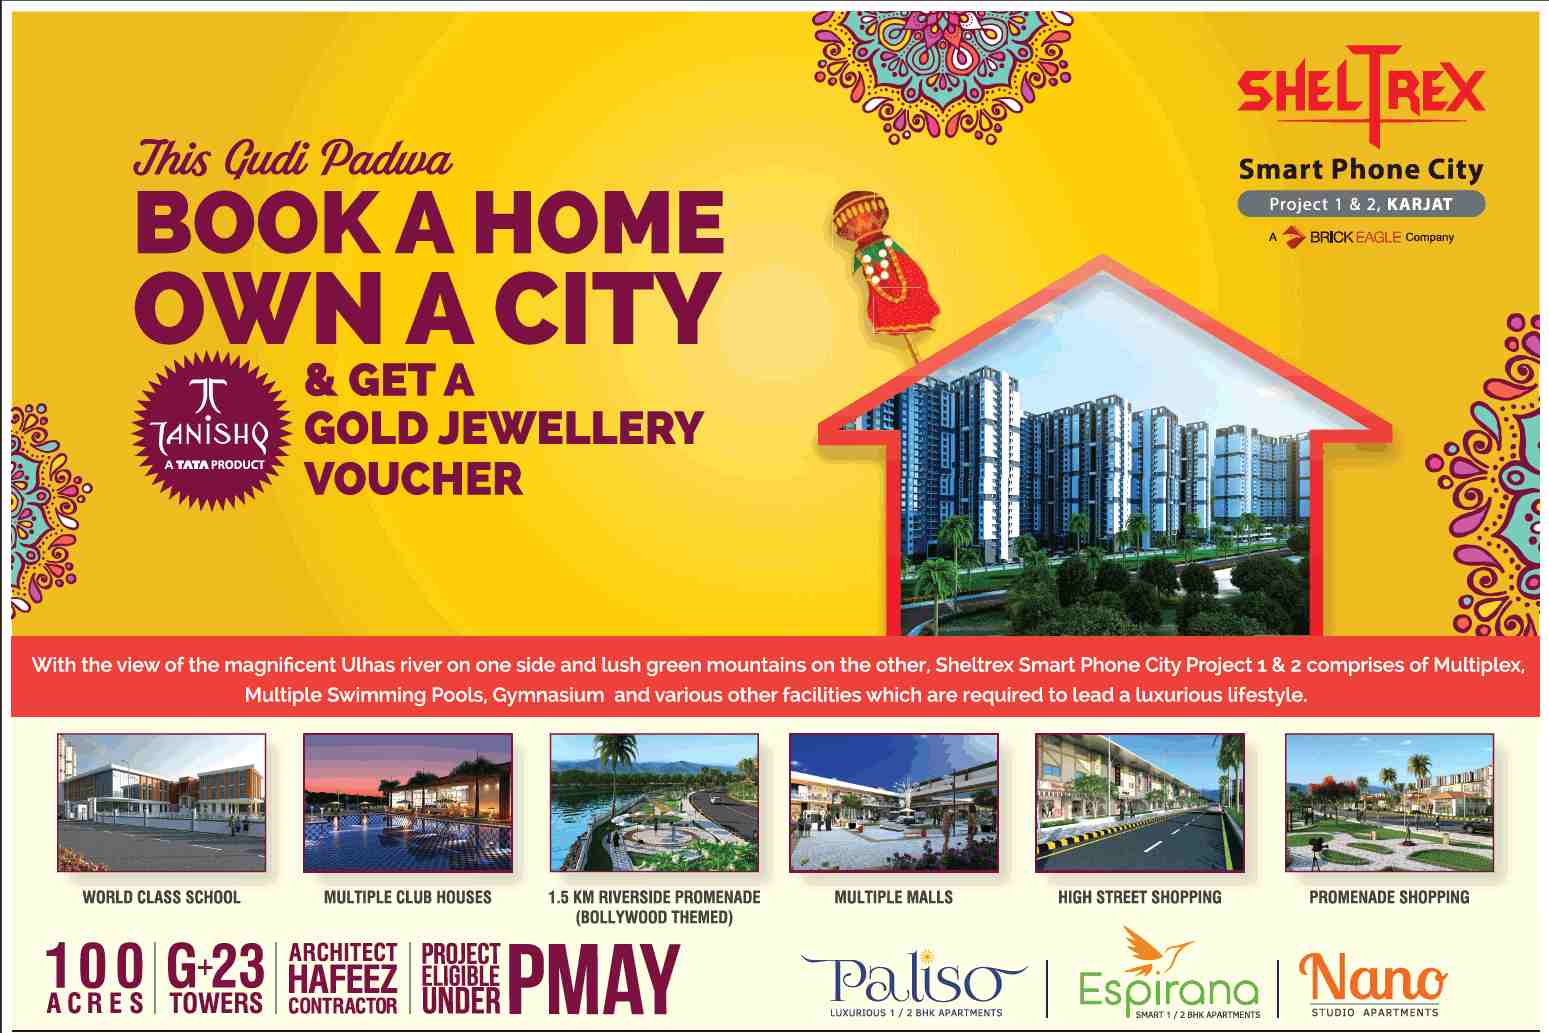 Book a home & get gold jewellery voucher at Sheltrex Smart Phone City in Mumbai